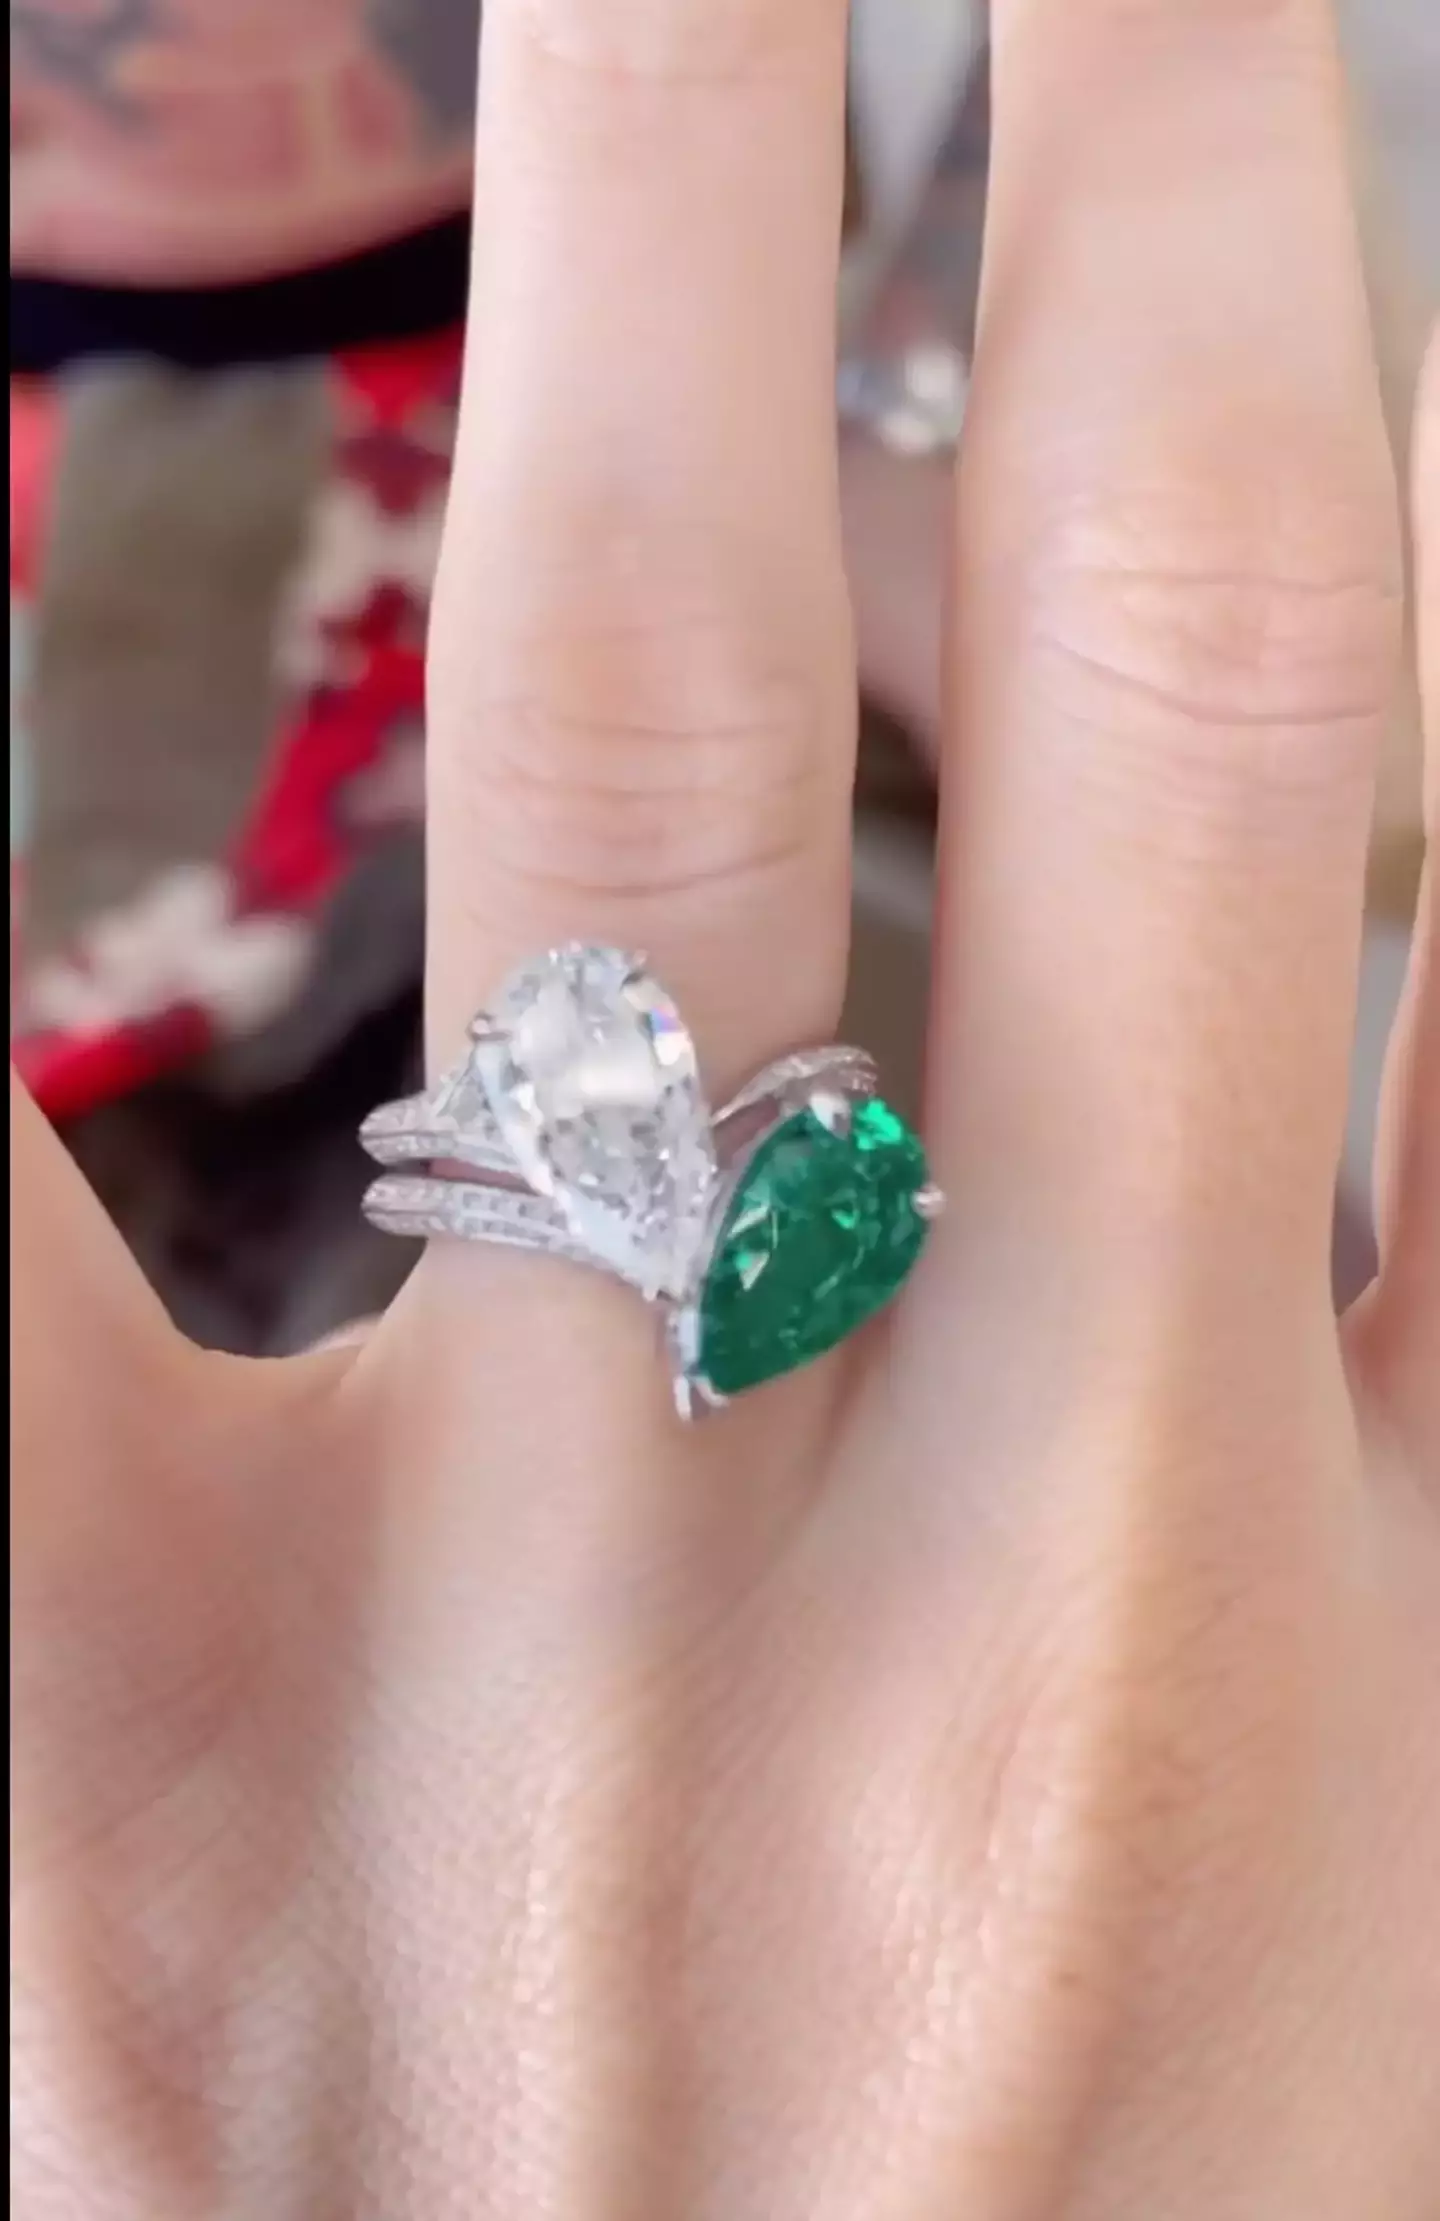 Megan Fox's engagement ring was specifically designed to hurt her if she took it off.